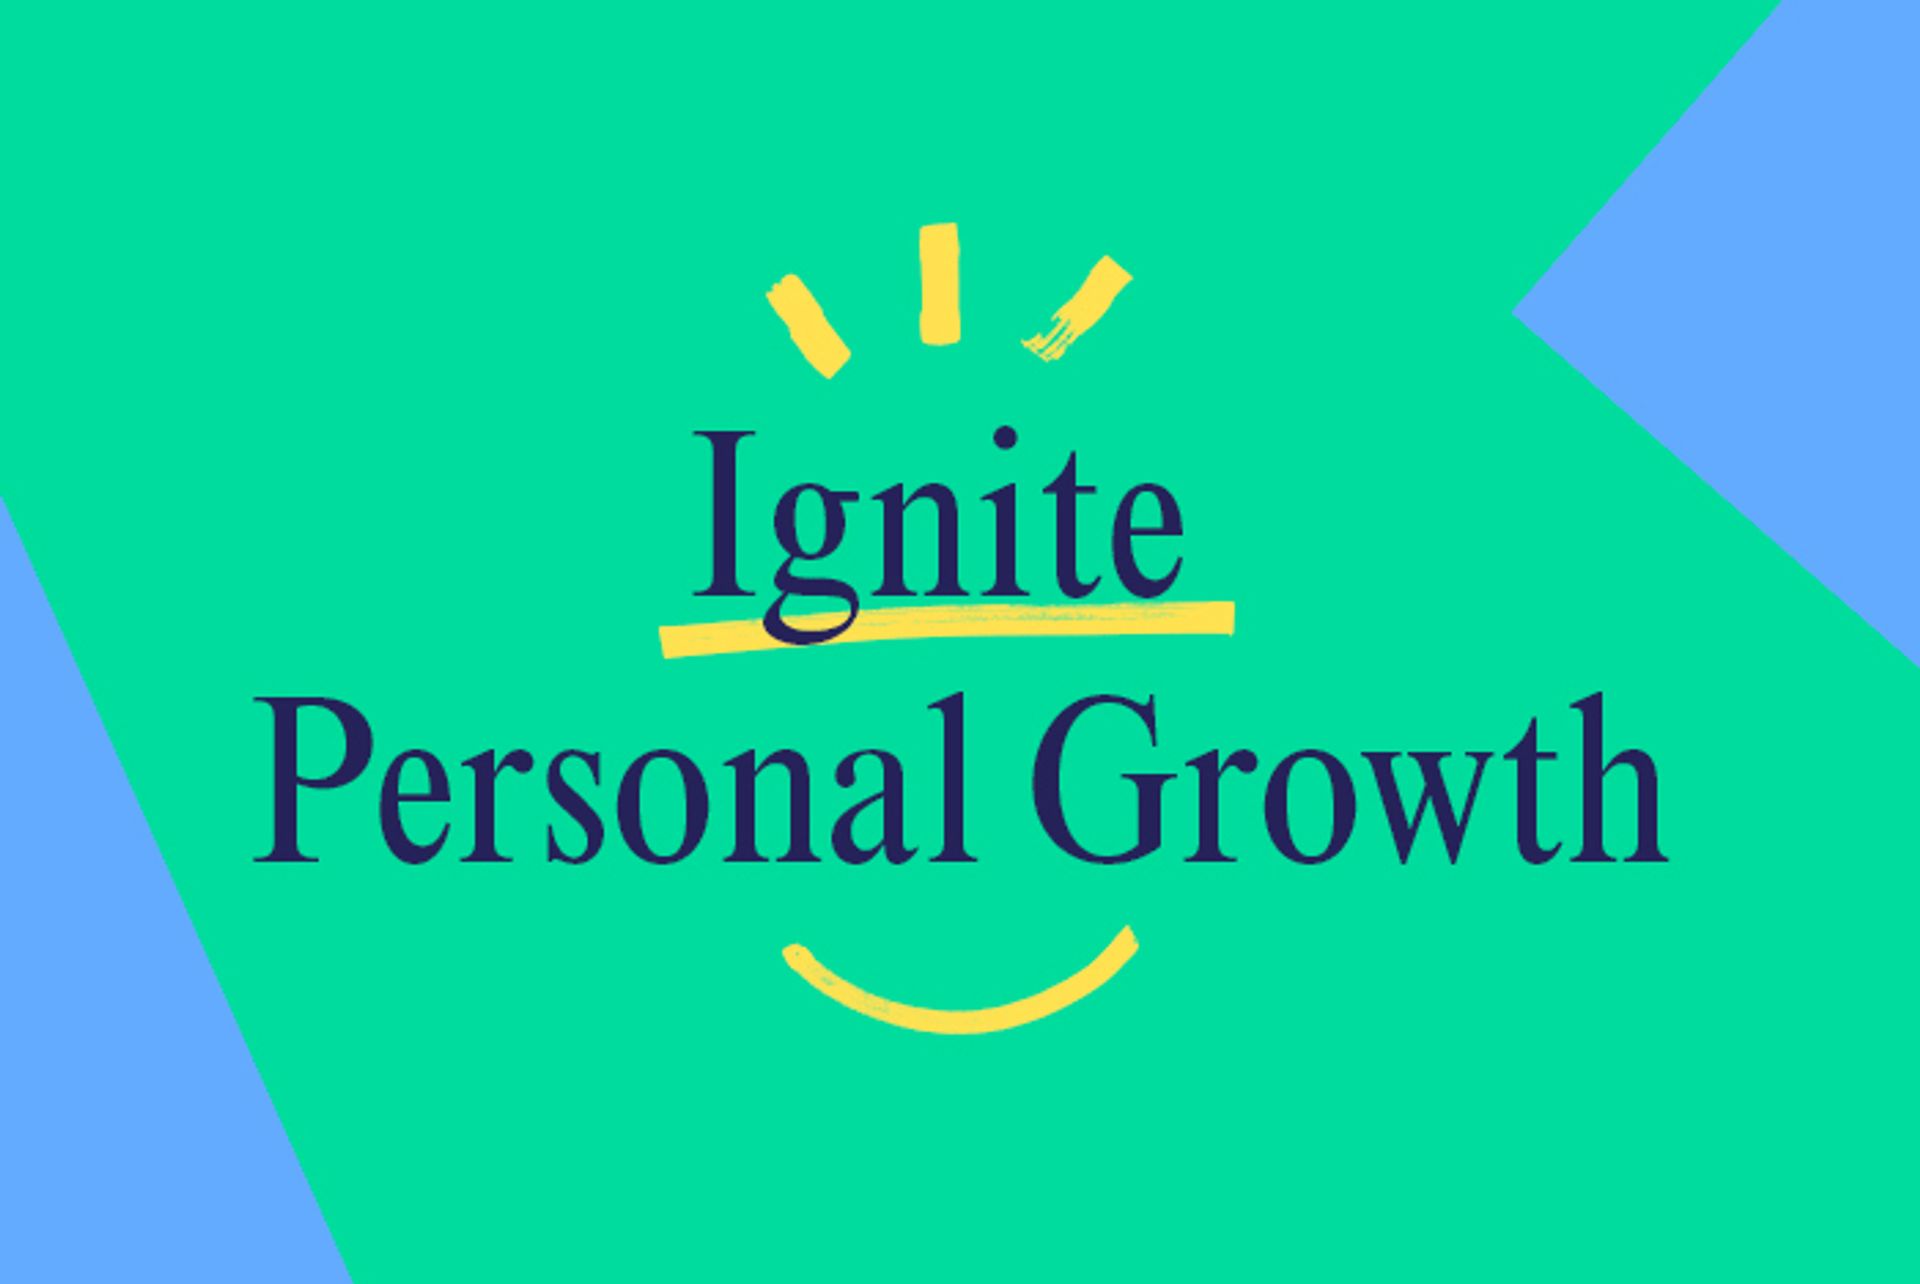 Ignite Personal Growth event imagery